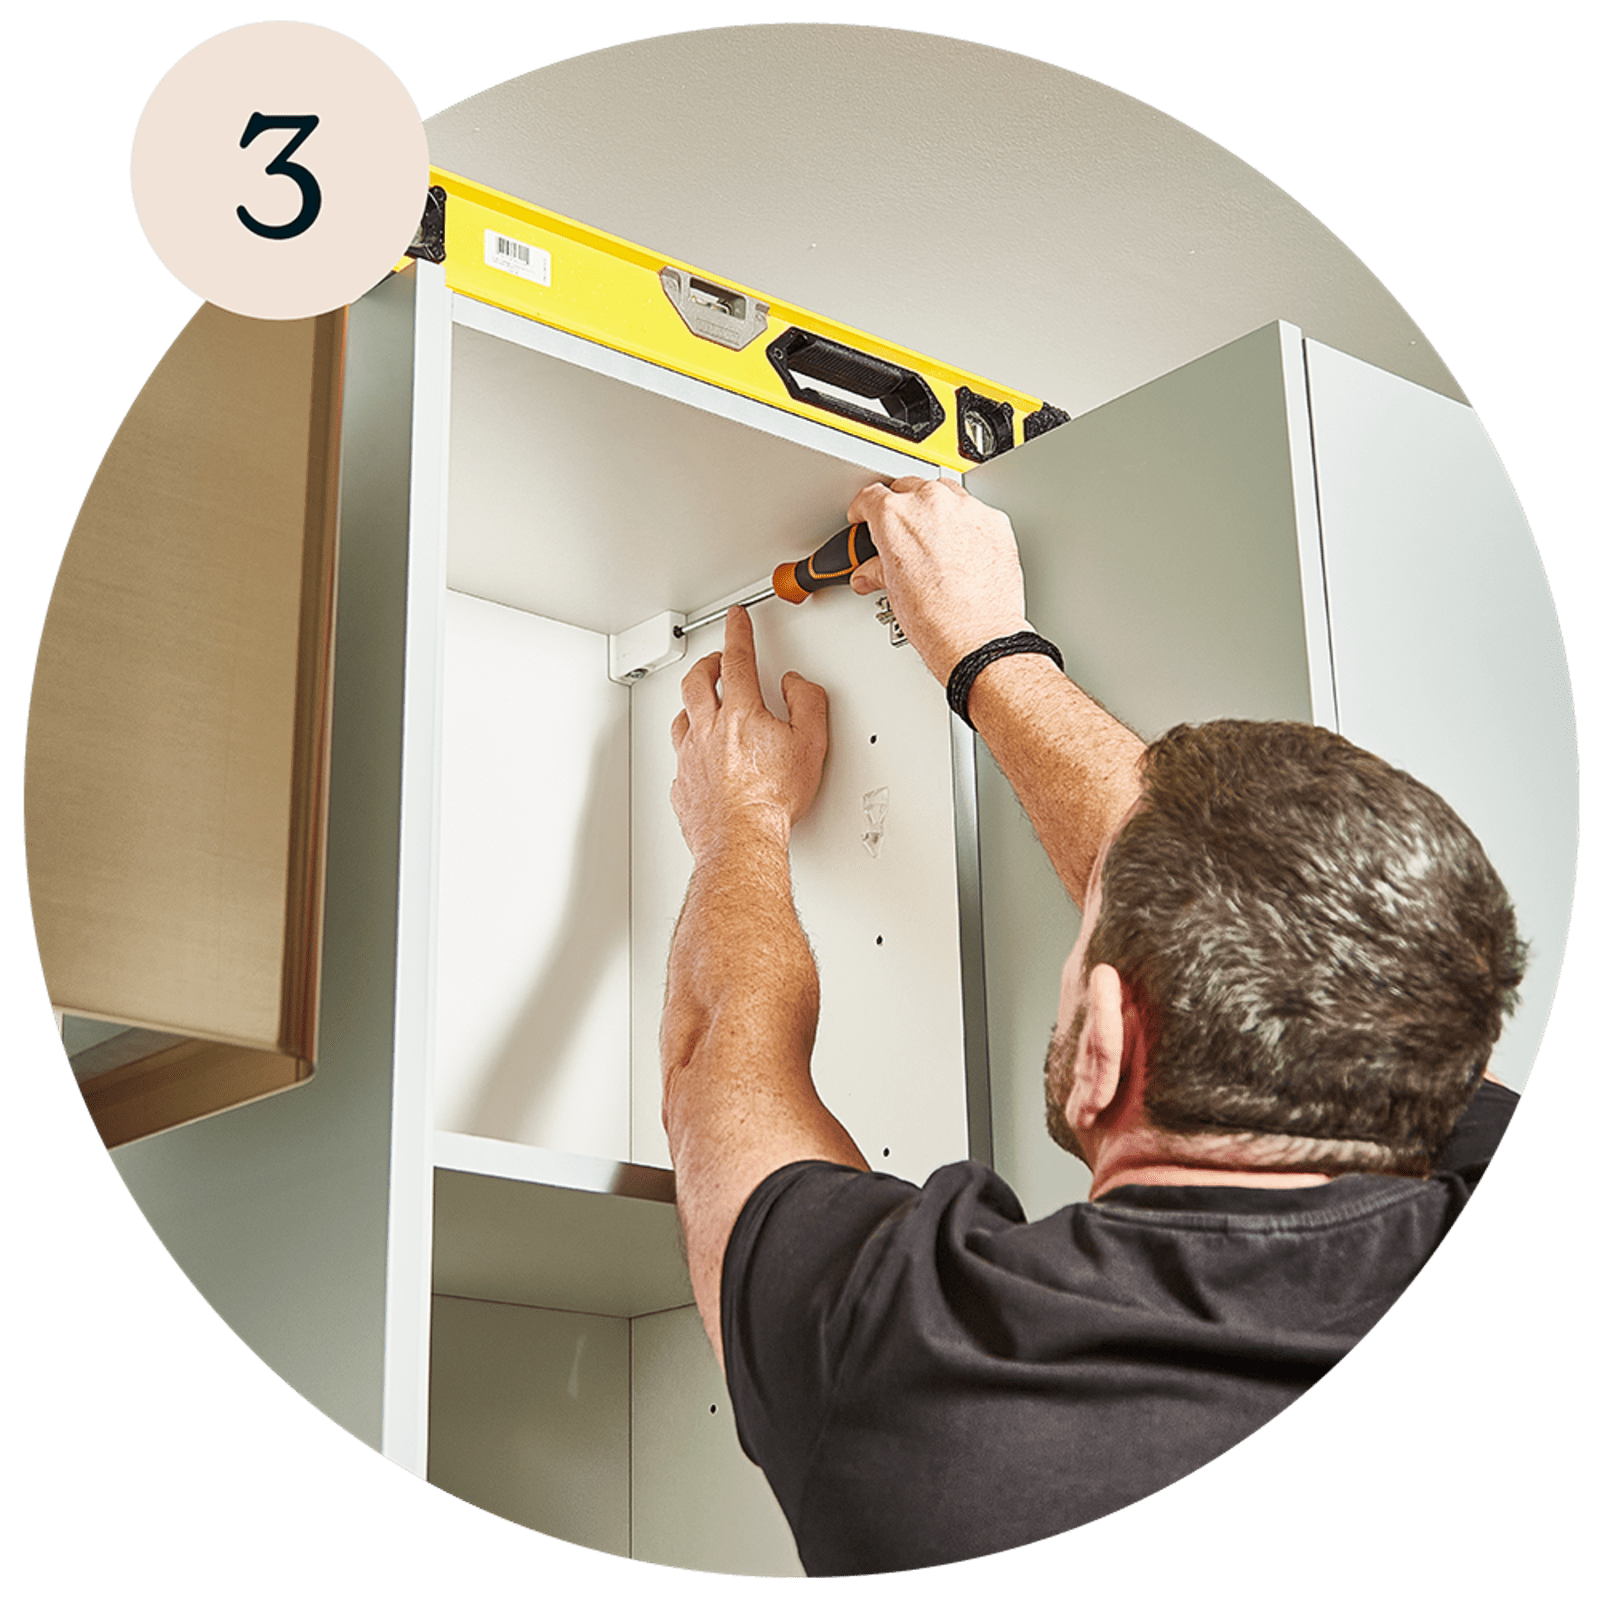 A man using tools to install a cabinet